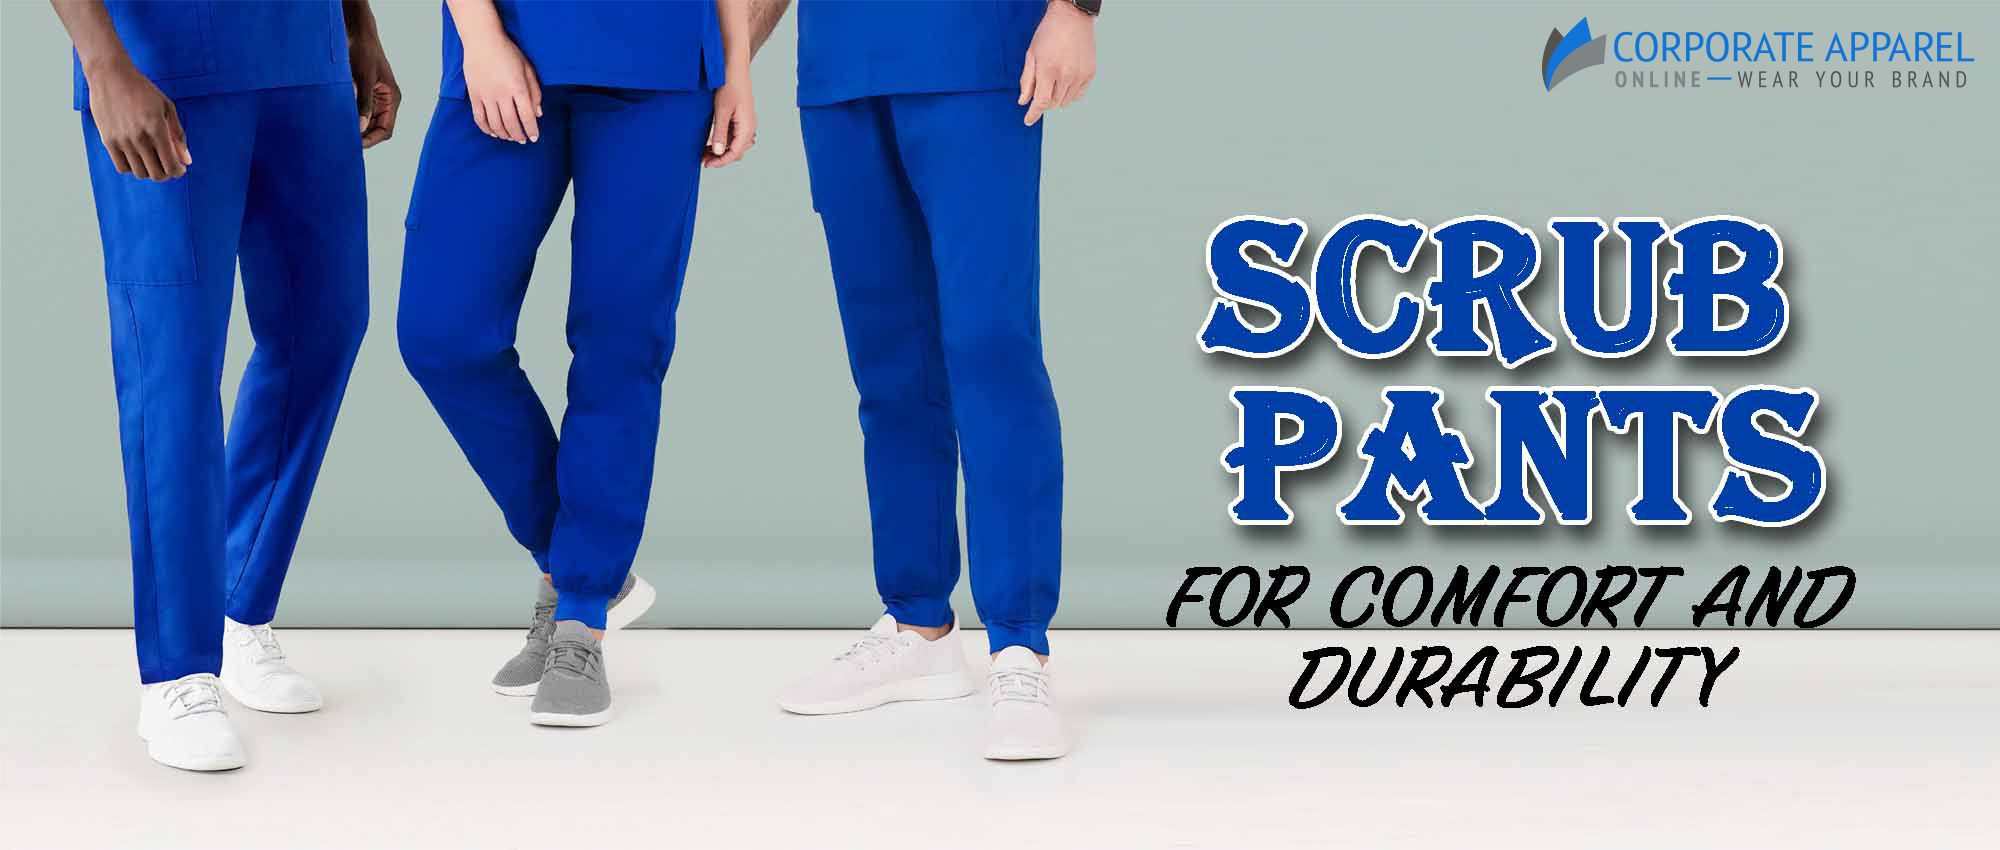 SCRUB PANTS FOR COMFORT AND DURABILITY – Corporate Apparel Online